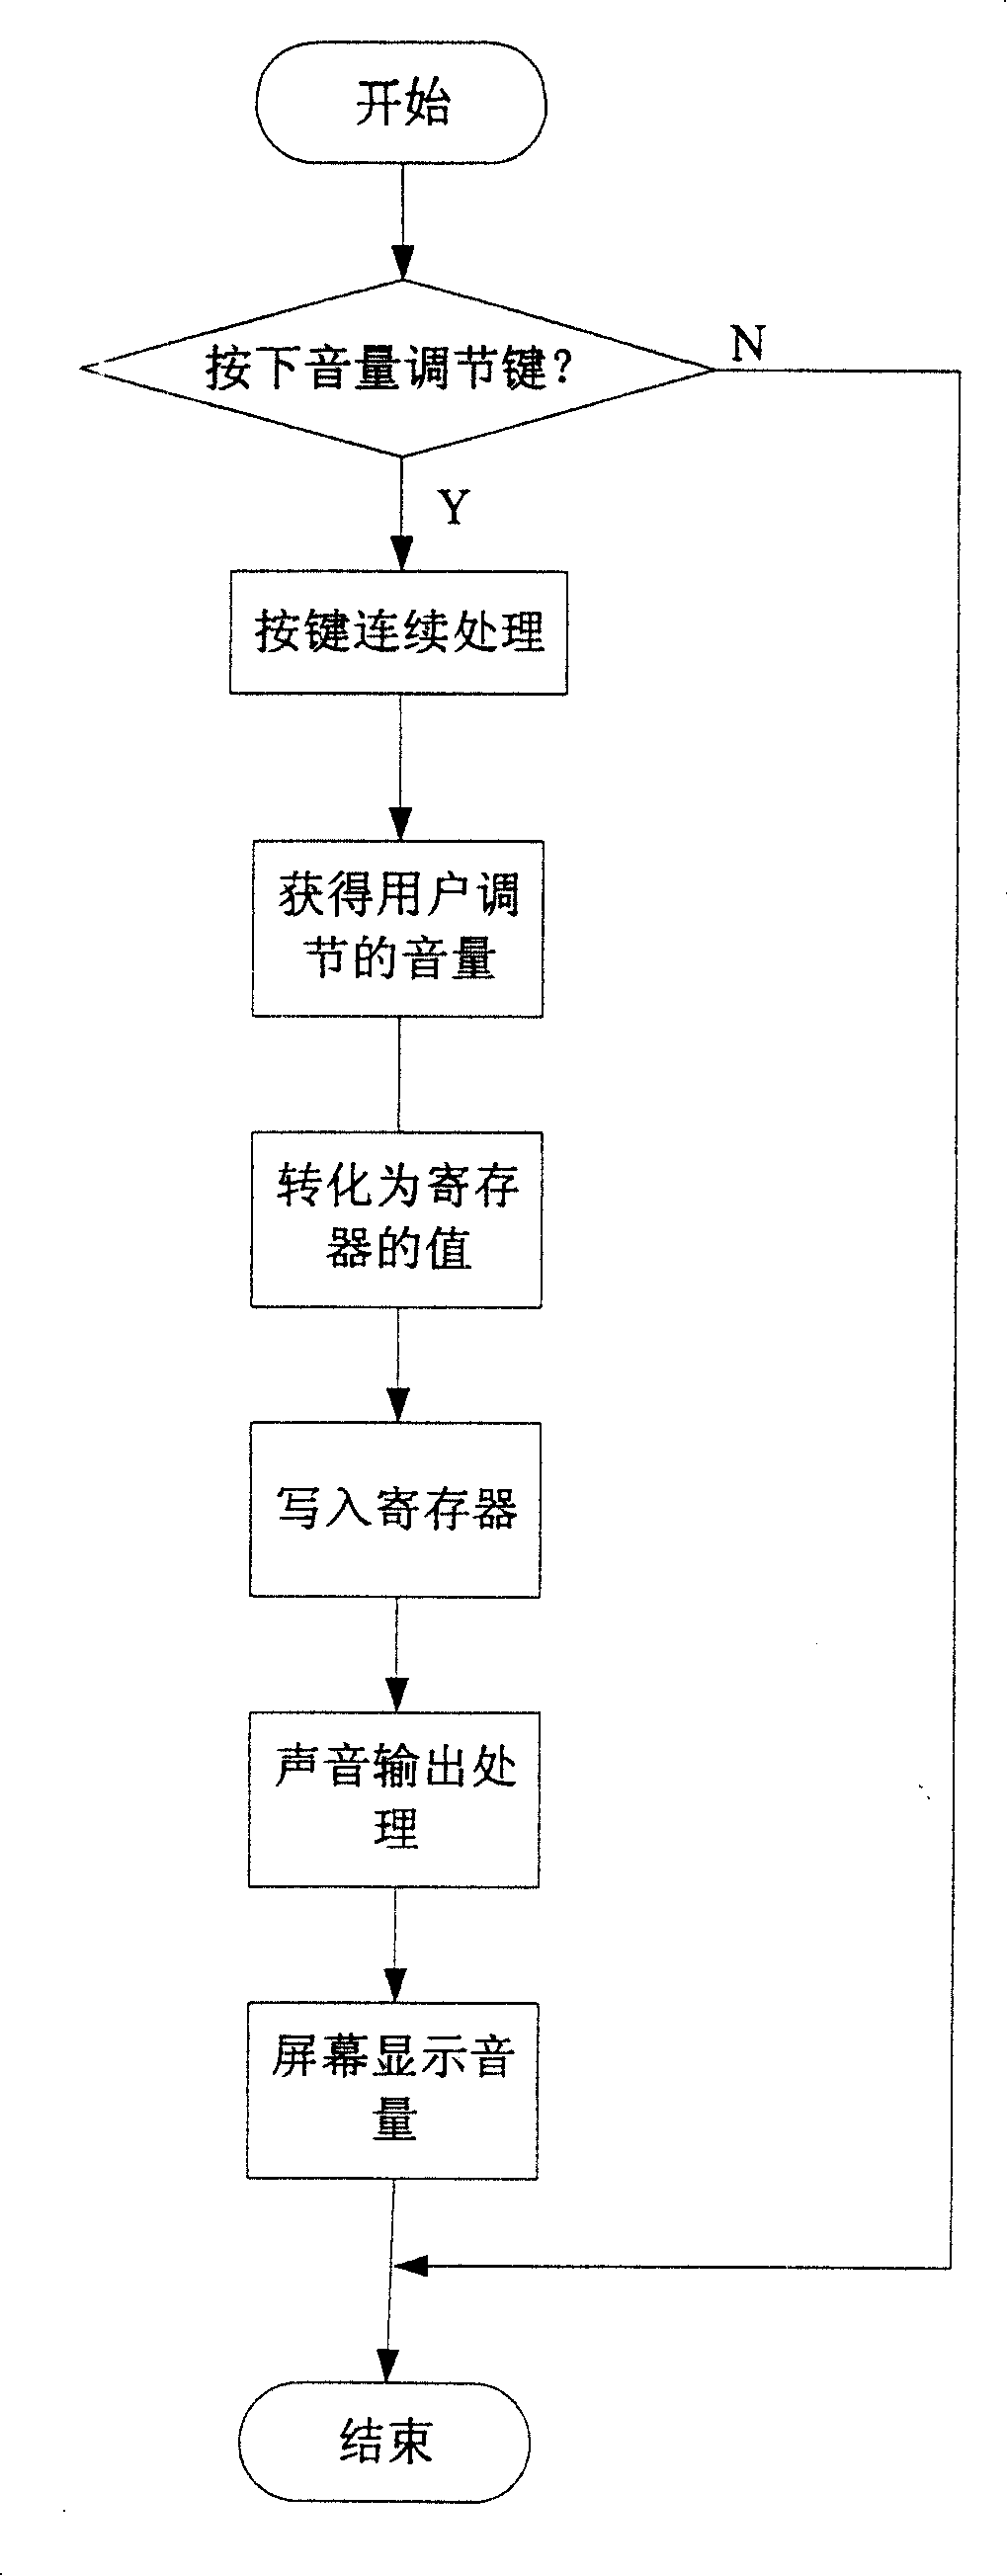 Method and apparatus for setting actual volume of television set